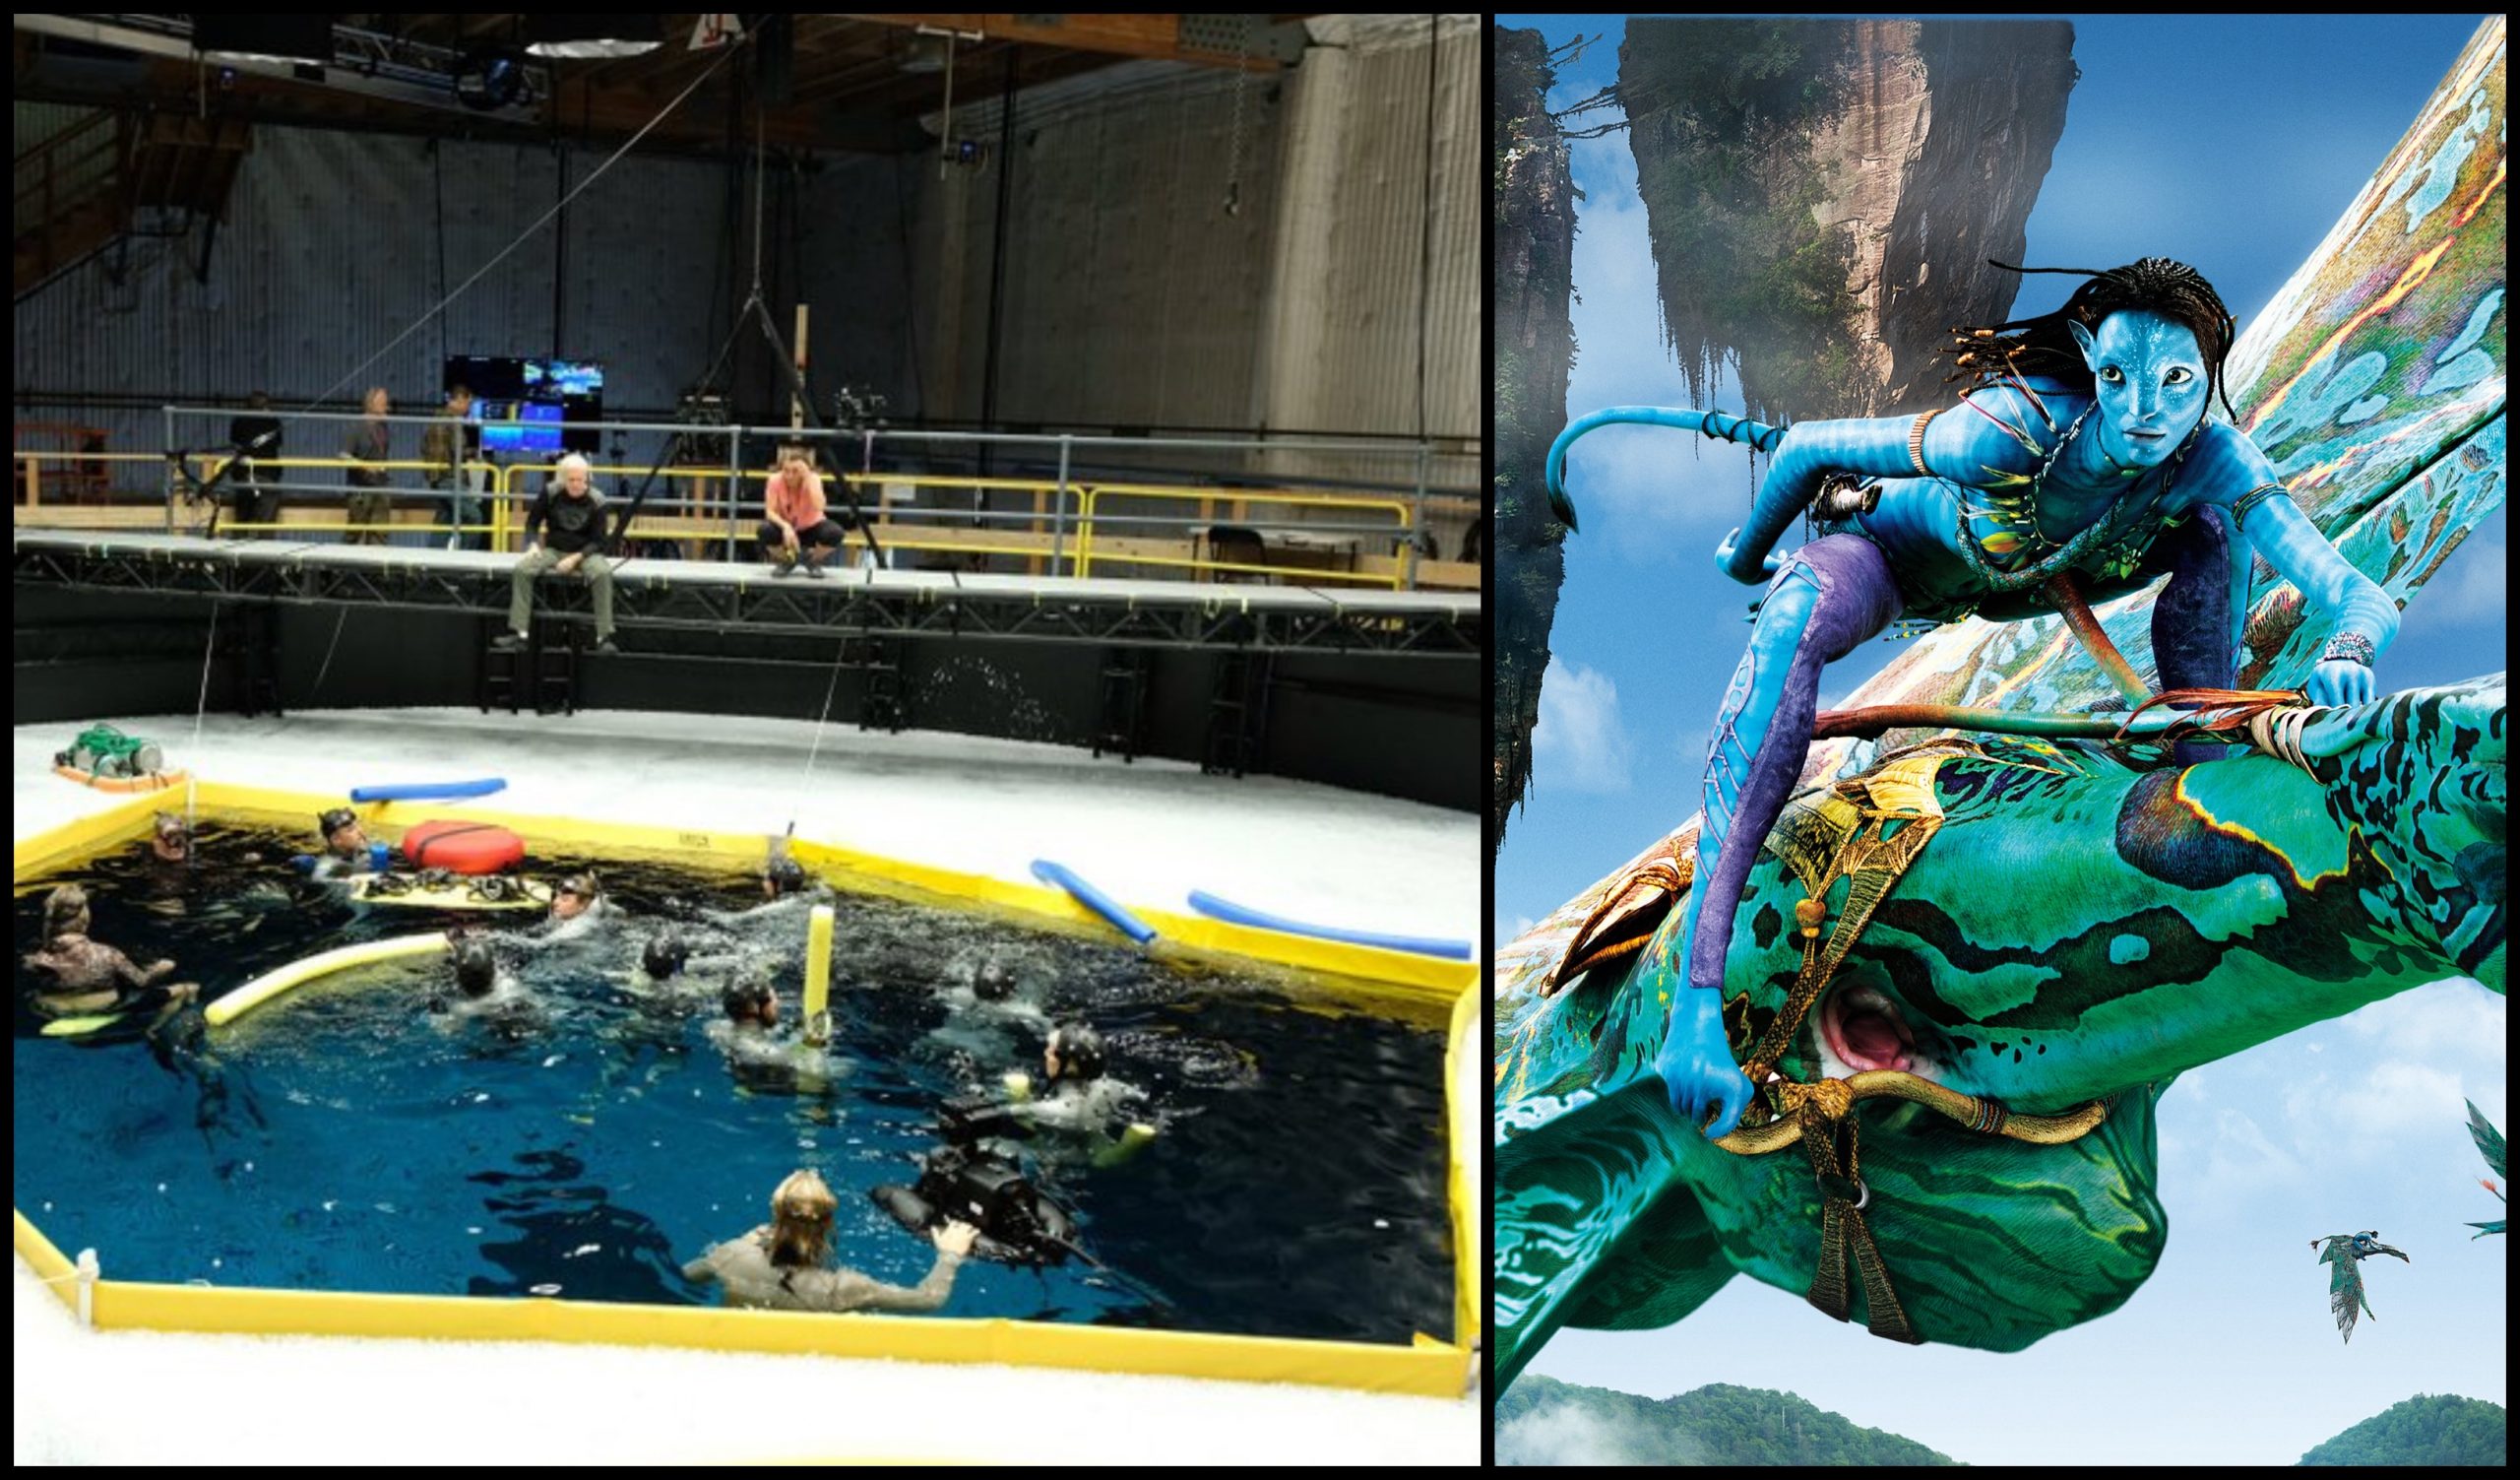 New Set Photos Reveal Underwater Scenes Being Filmed for Avatar Sequels